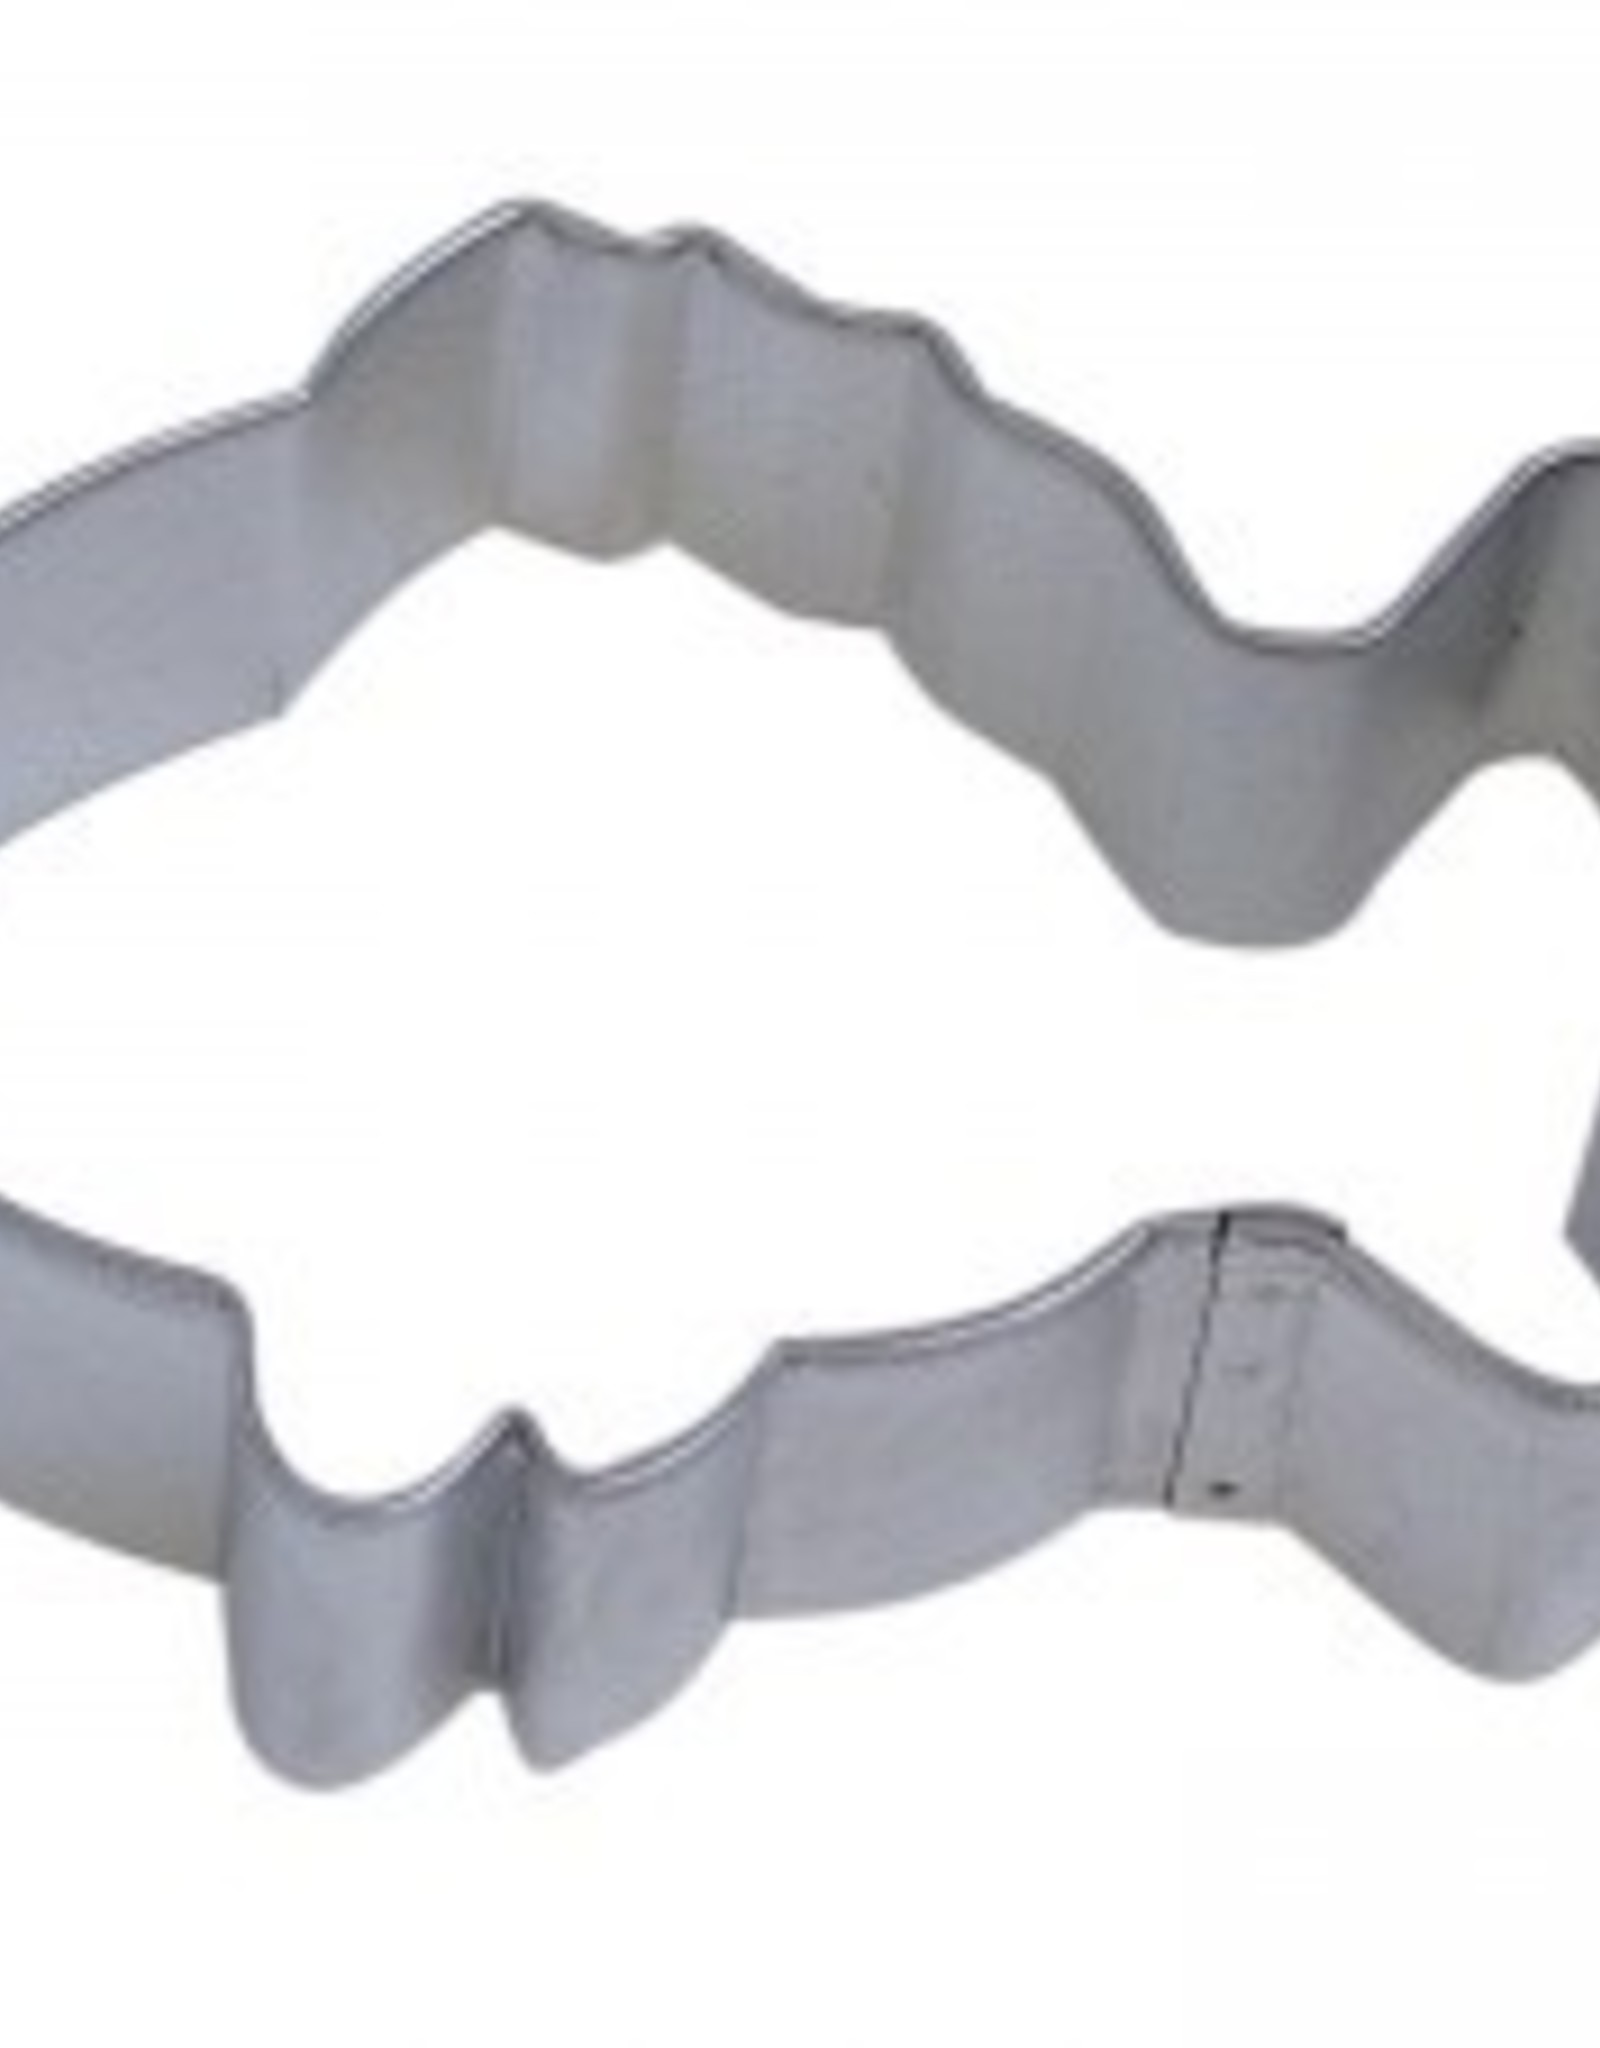 off the beaten path Tropical Fish Cookie Cutter (3.5")